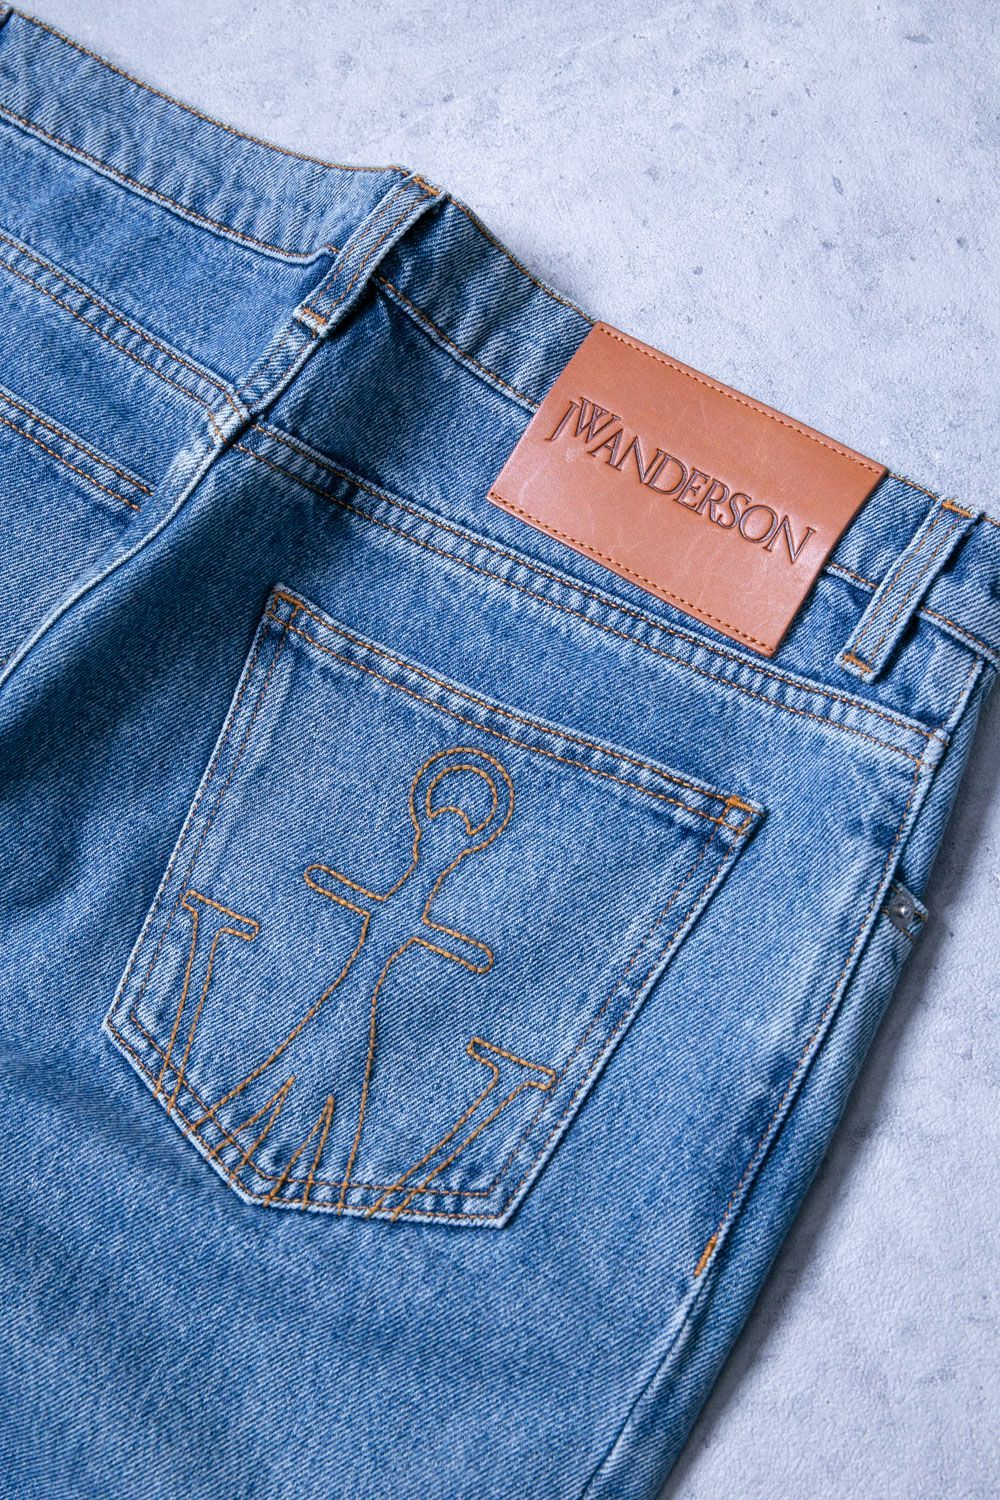 JW Anderson TURN UP SLIM JEANS スリムジーンズ